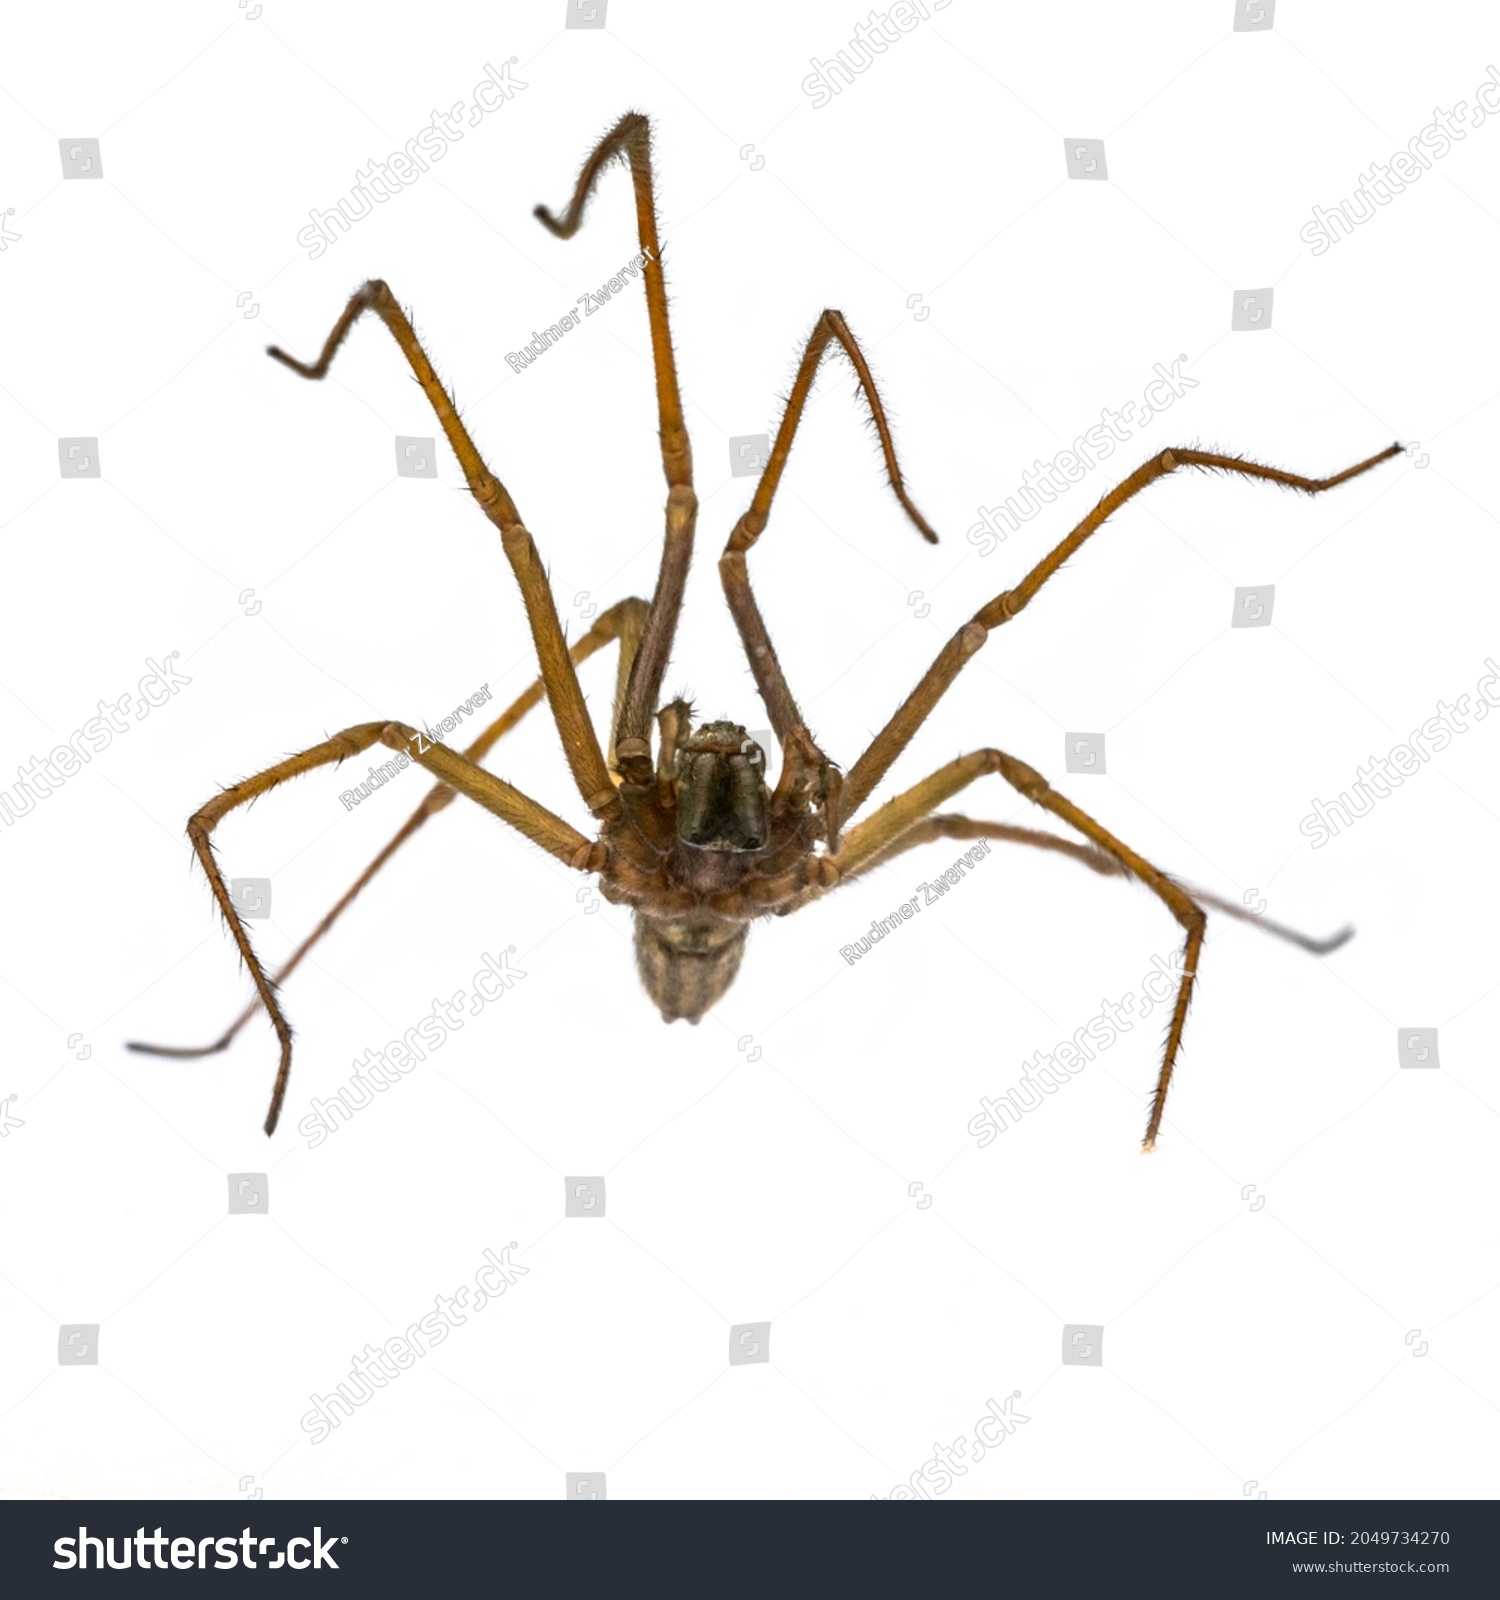 Giant house spider (Eratigena atrica) frontal underside view of arachnid with long hairy legs isolated on white background #2049734270